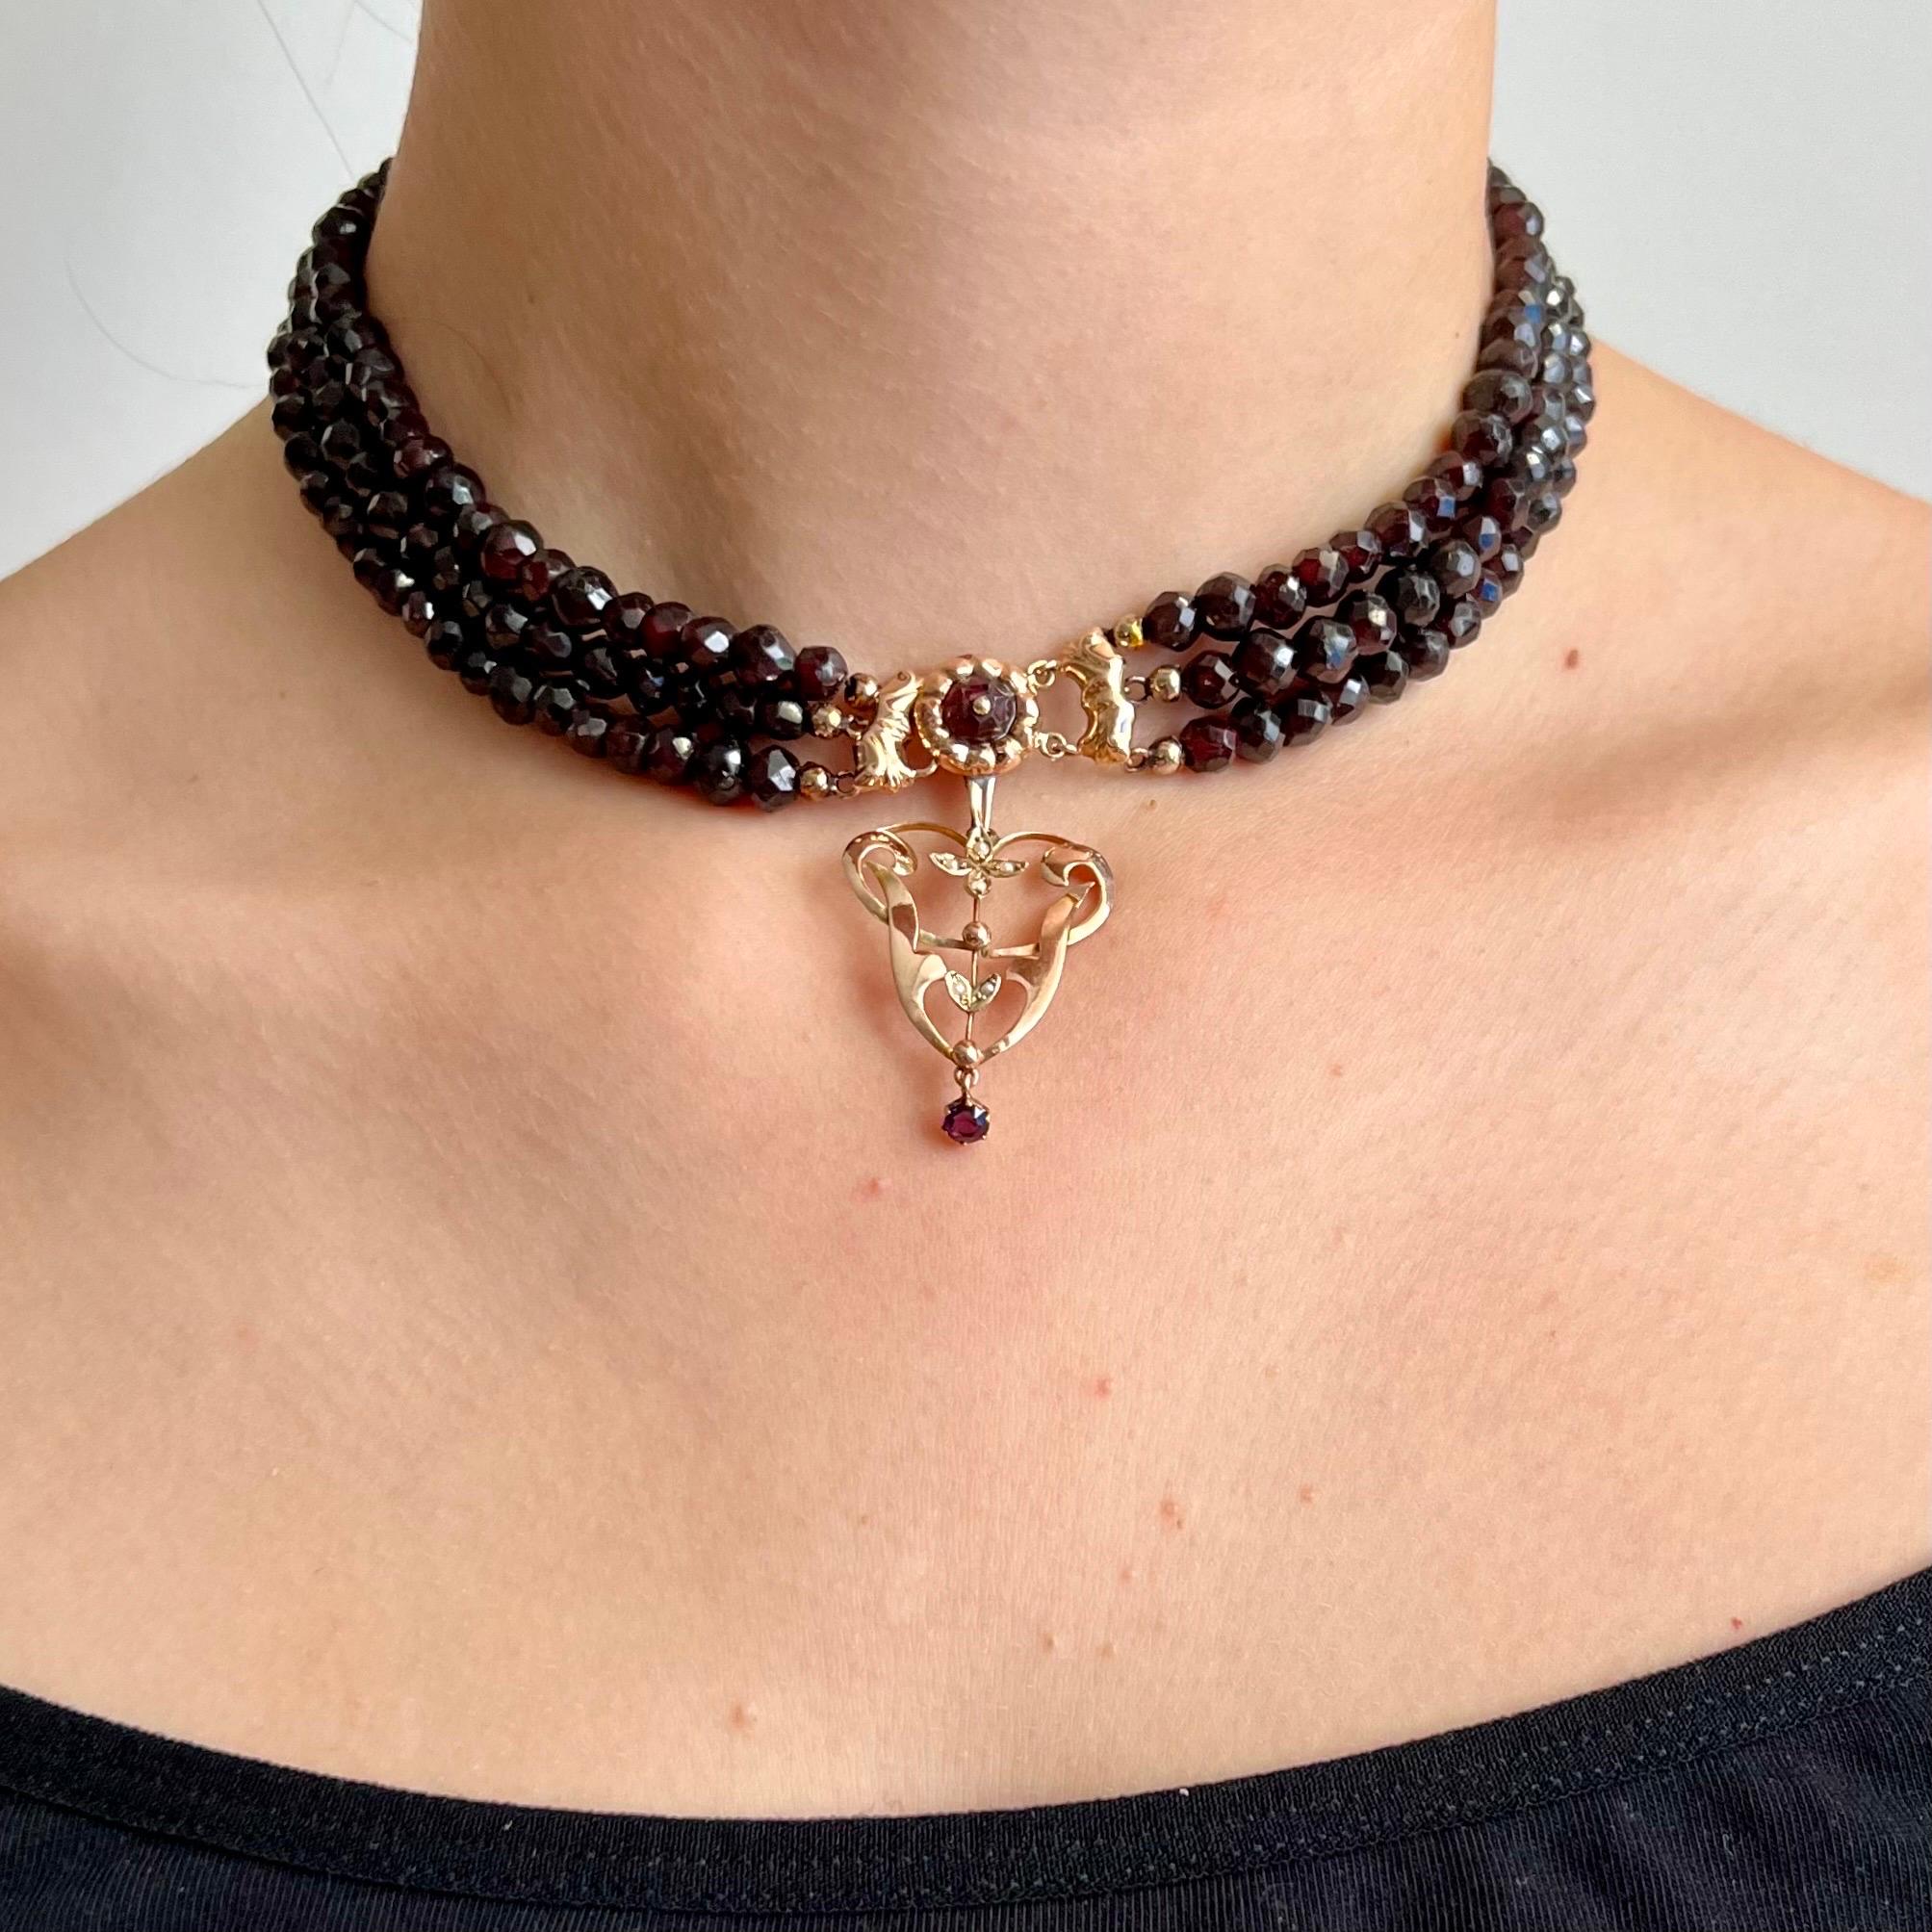 An antique late 19th century garnet necklace set with a 14 karat gold worked clasp. The necklace consists of three strands strung with faceted garnet stones. The gold repousse clasp is round shaped and set with a garnet. Below this round repousse